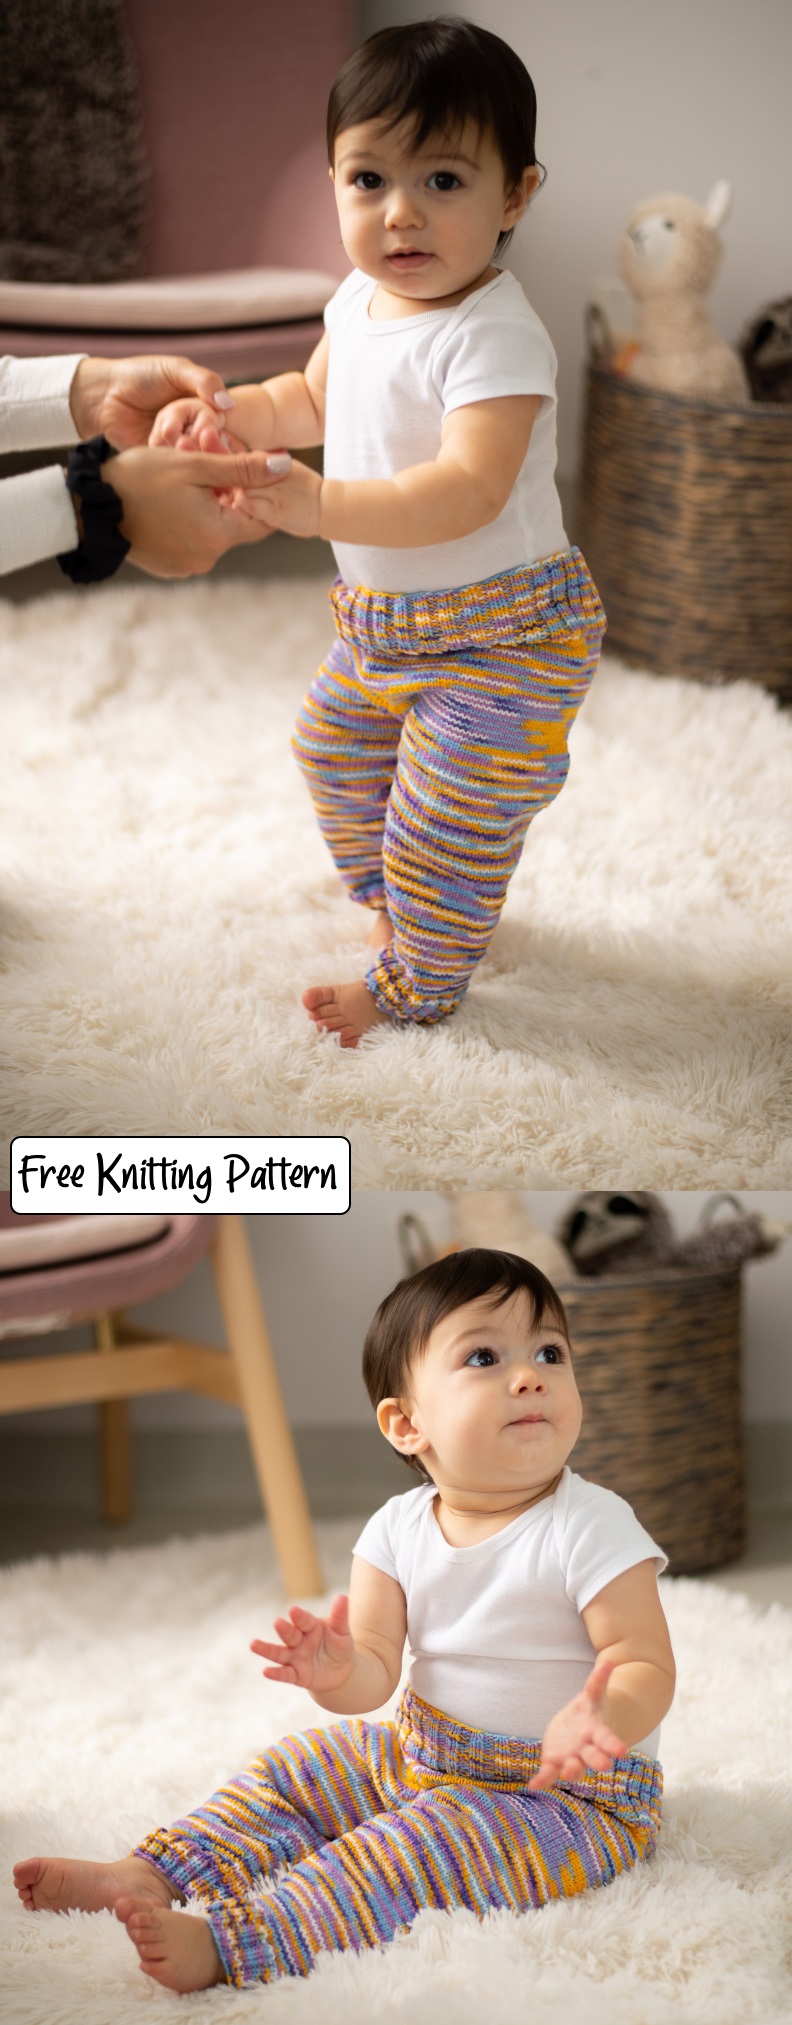 50+New Baby Knitting Patterns Free for 2020 Download them Now!